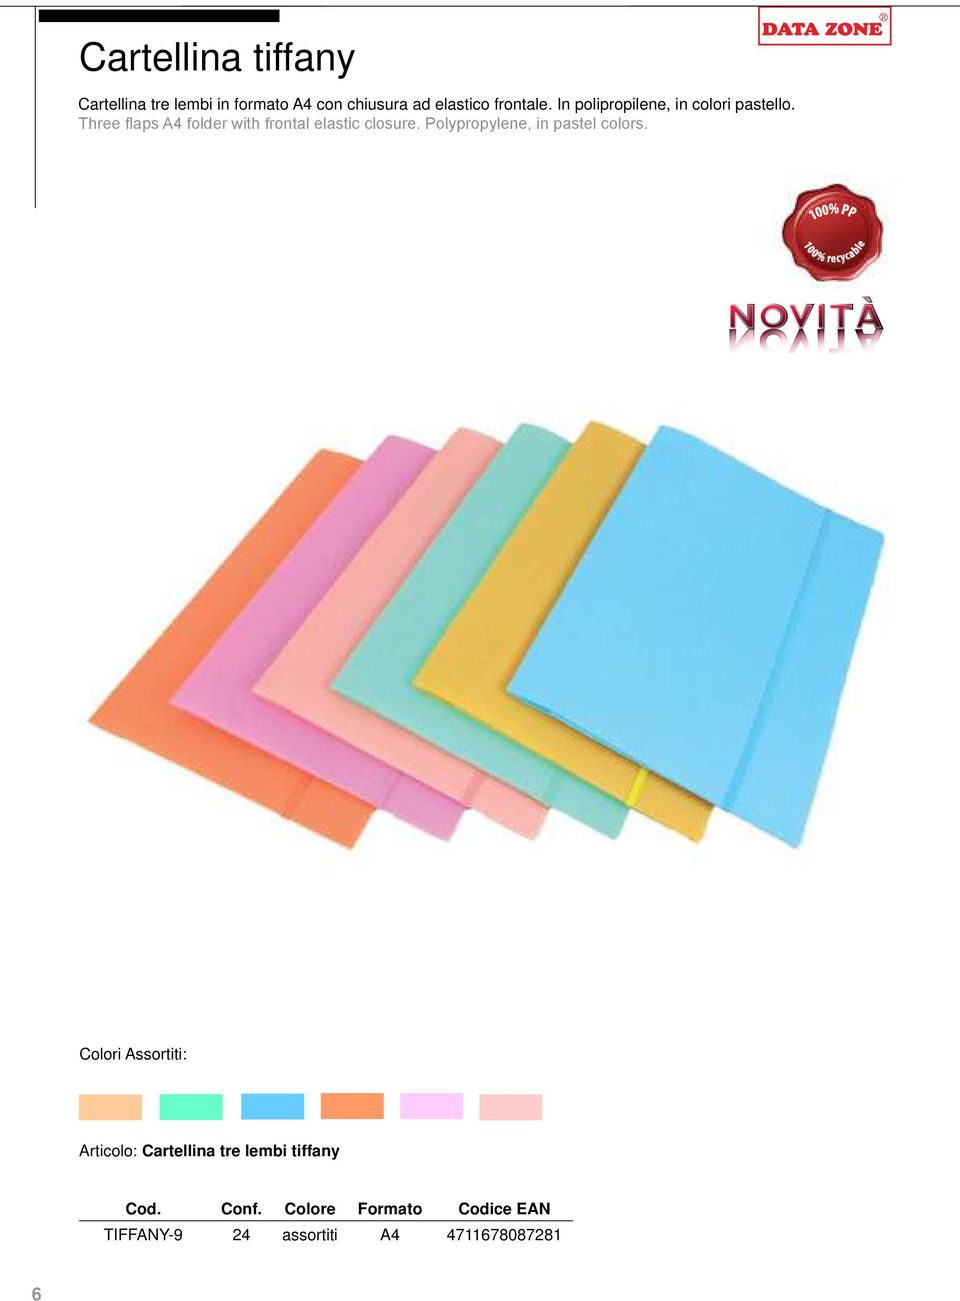 Three flaps A4 folder with frontal elastic closure. Polypropylene, in pastel colors.